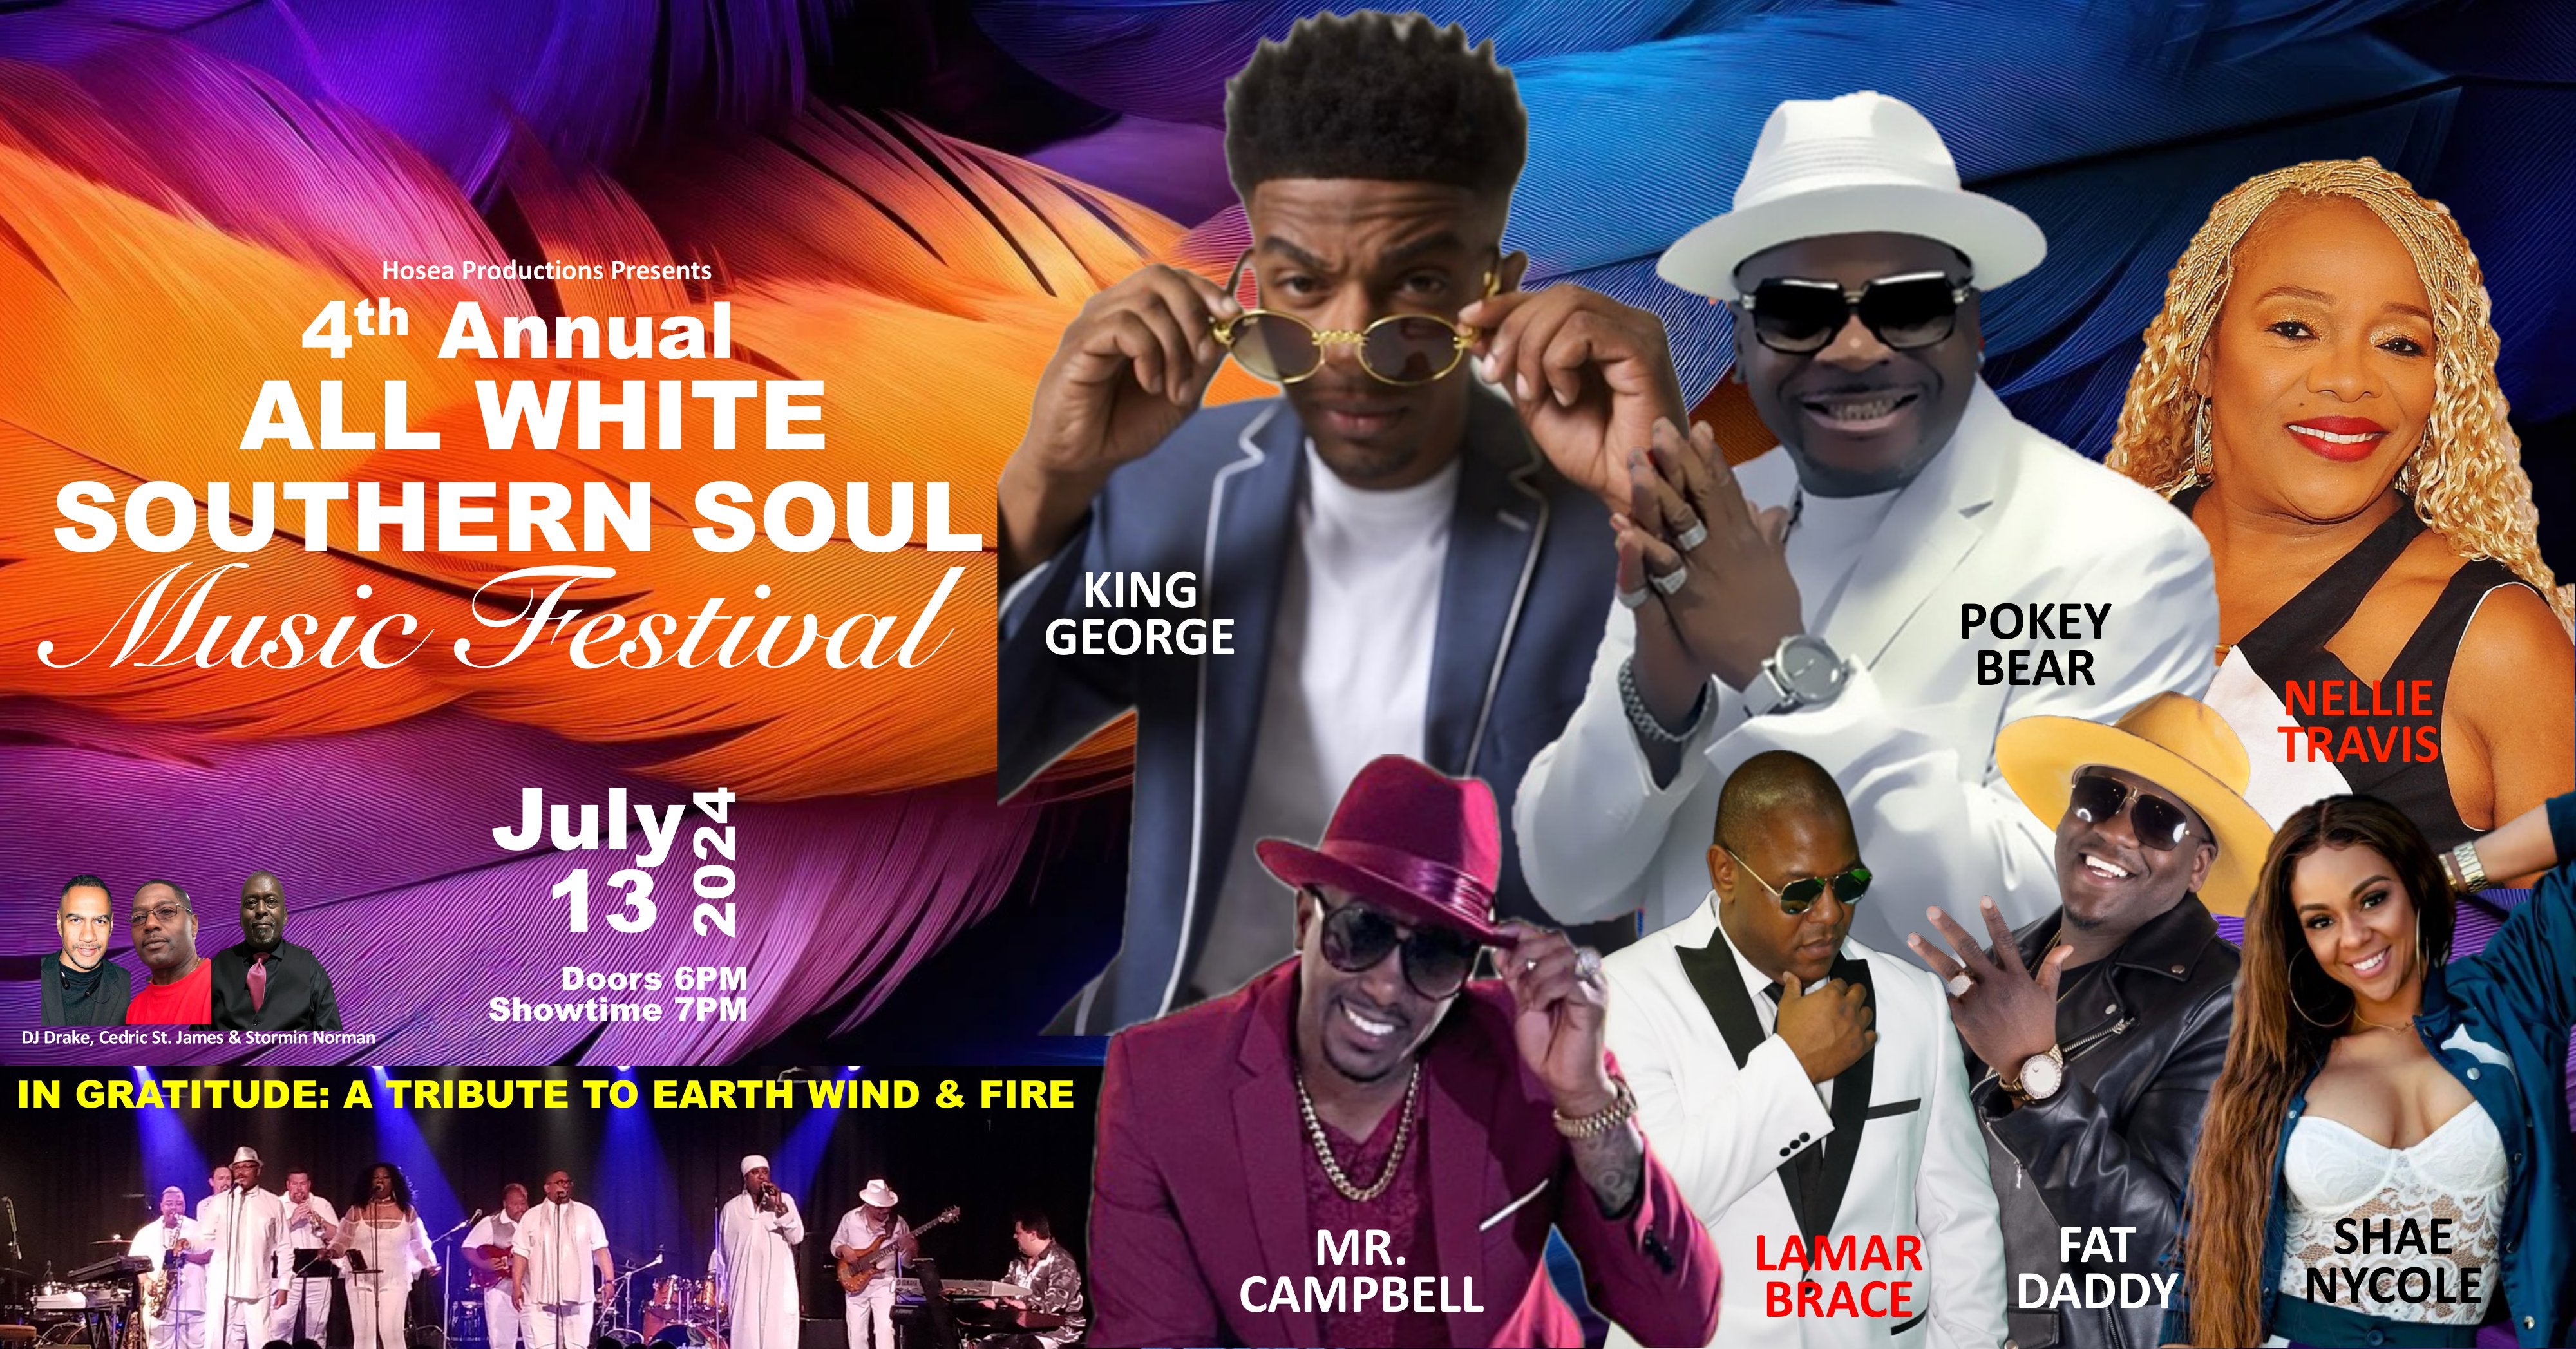 All White Southern Soul Music Festival